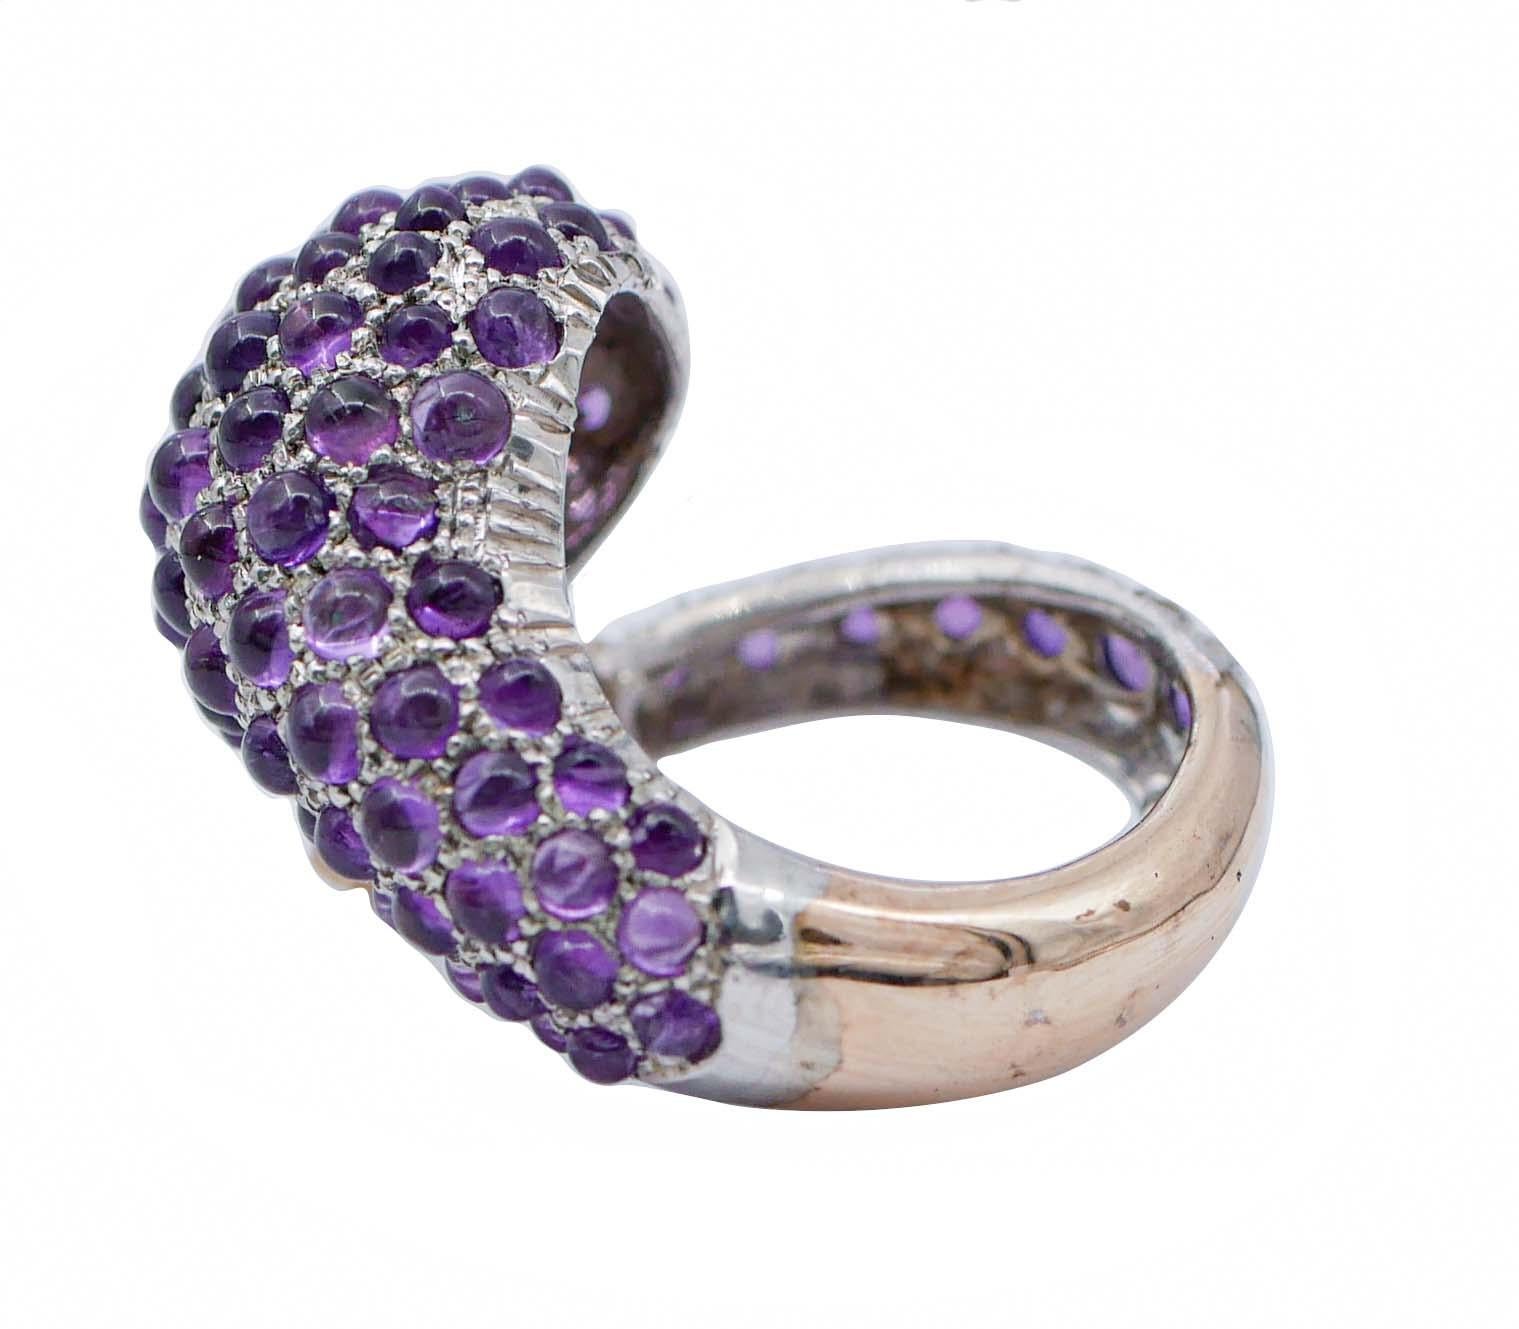 Retro Amethysts, Green Stones, Diamonds, Rose Gold and Silver Snake Ring